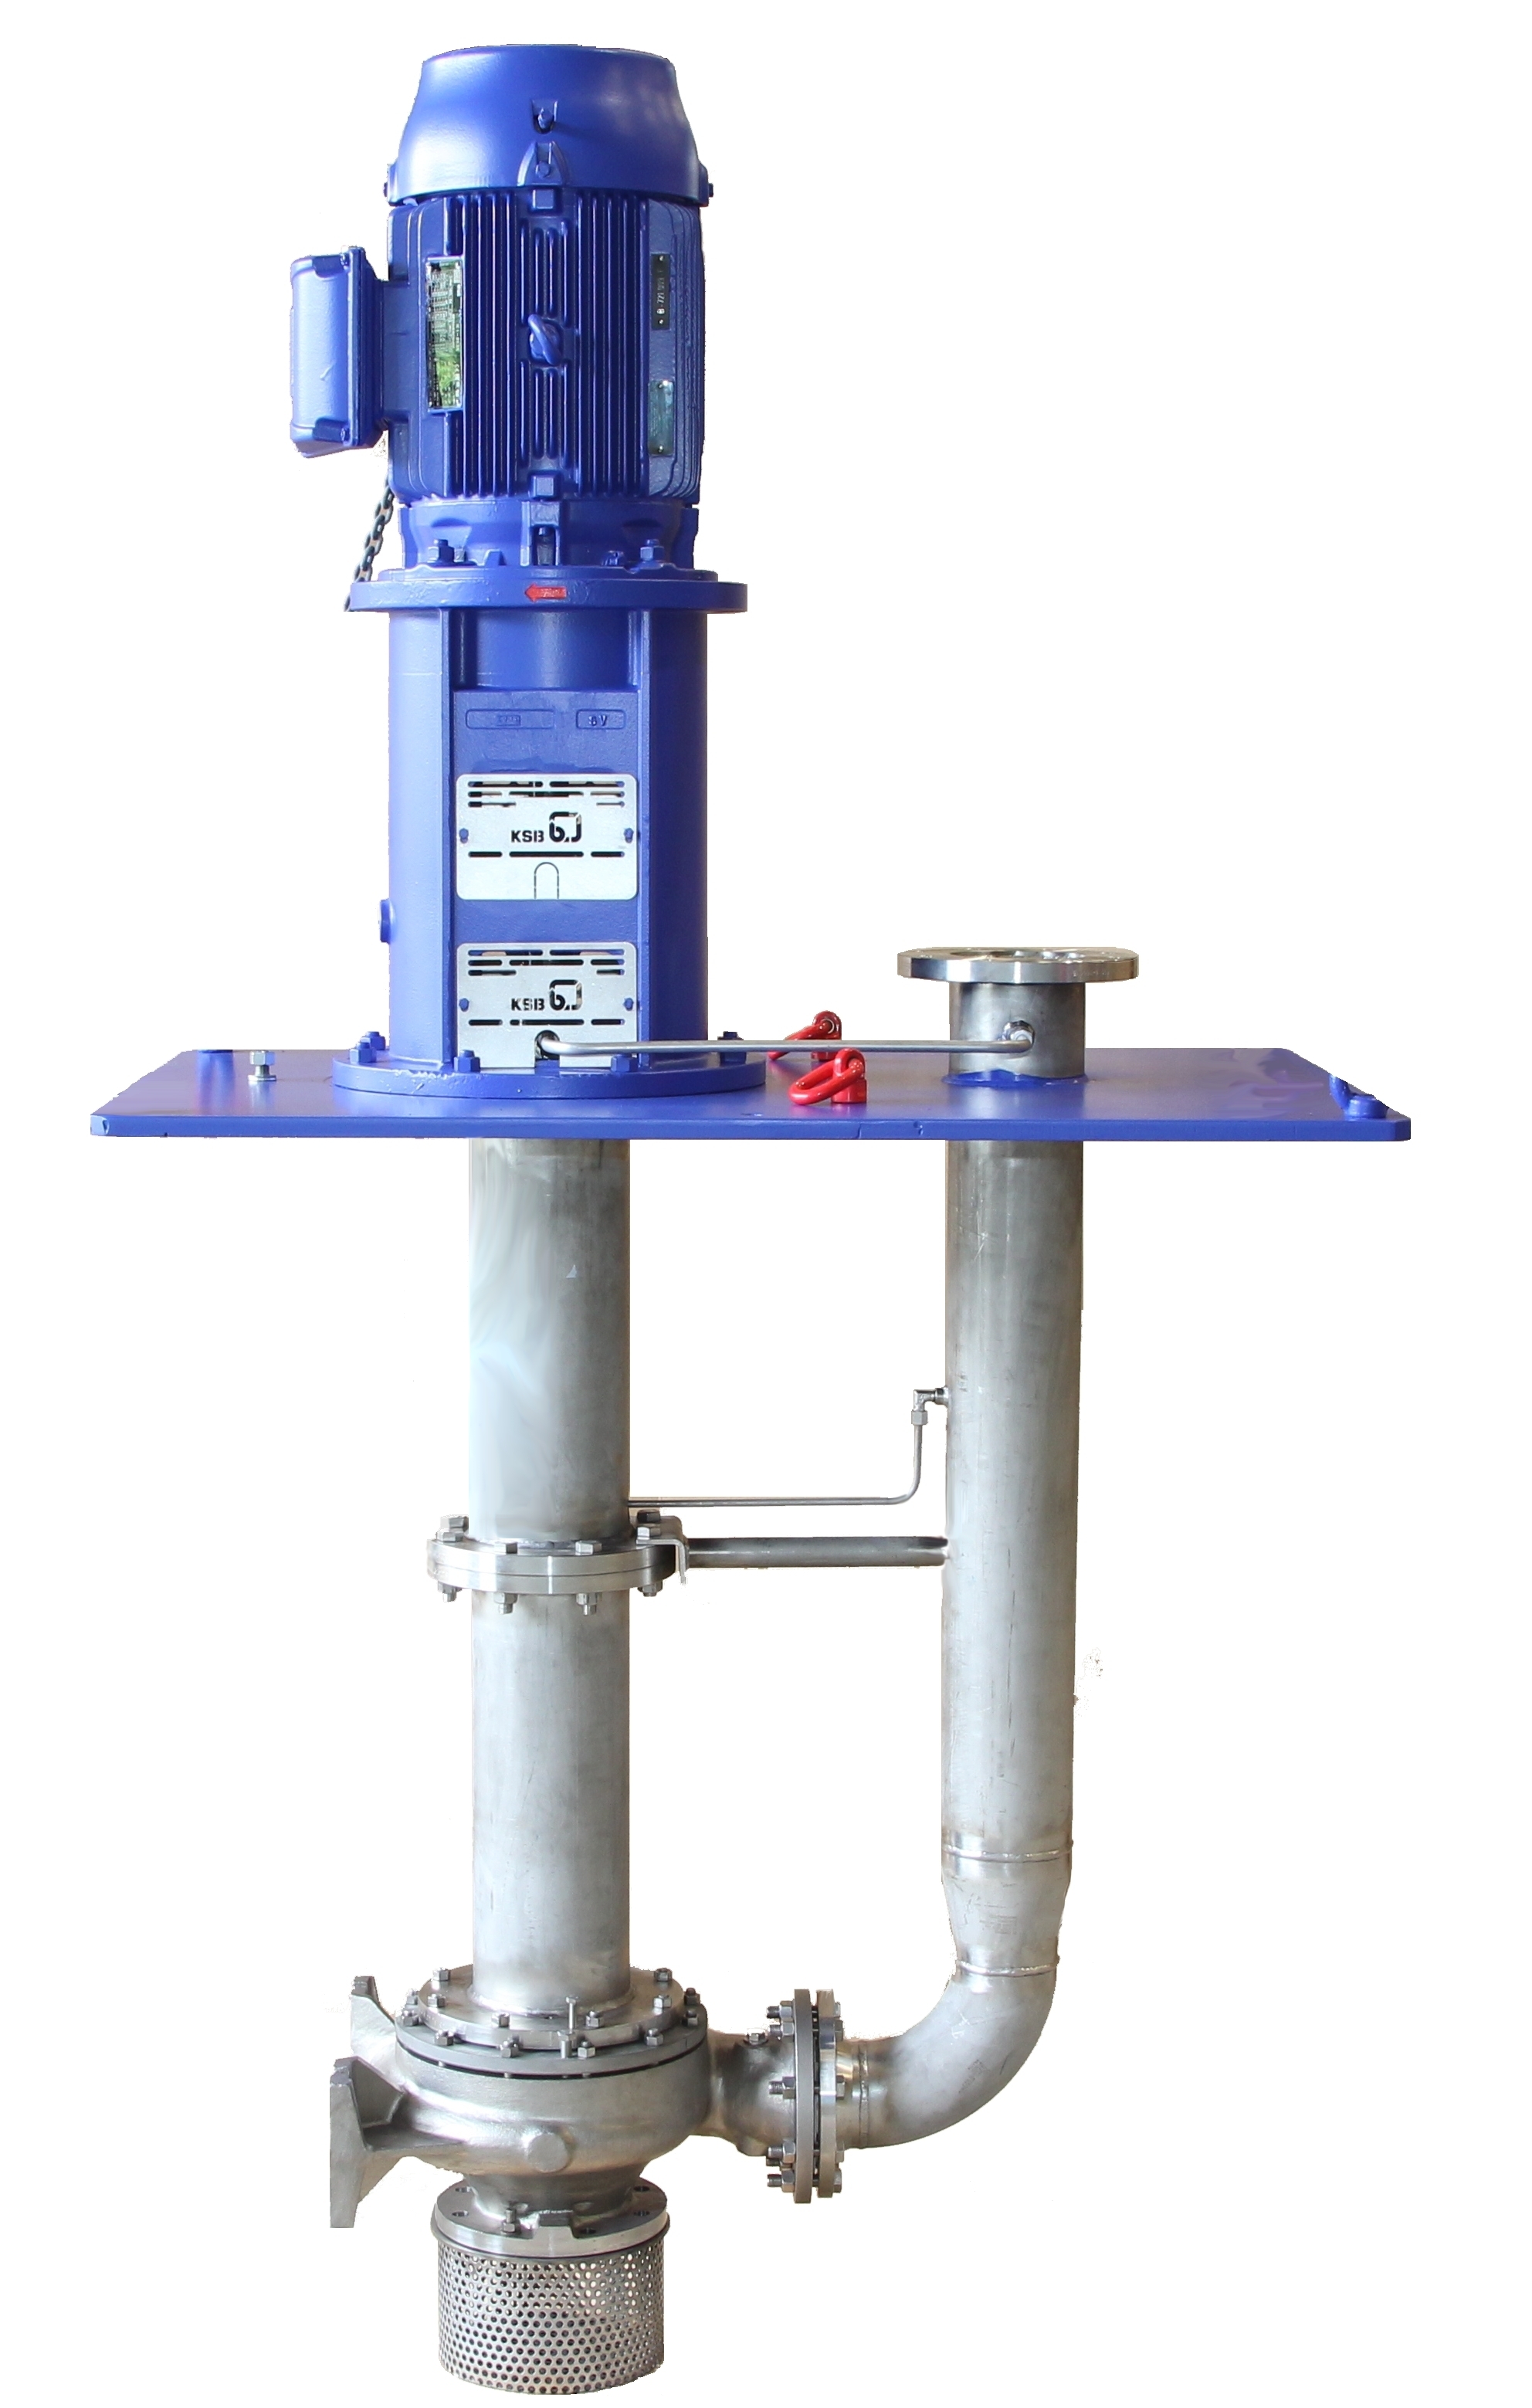 The new vertical suspended pumps of the Estigia type series for installation in tanks under atmospheric pressure. © KSB SE & Co. KGaA, Frankenthal